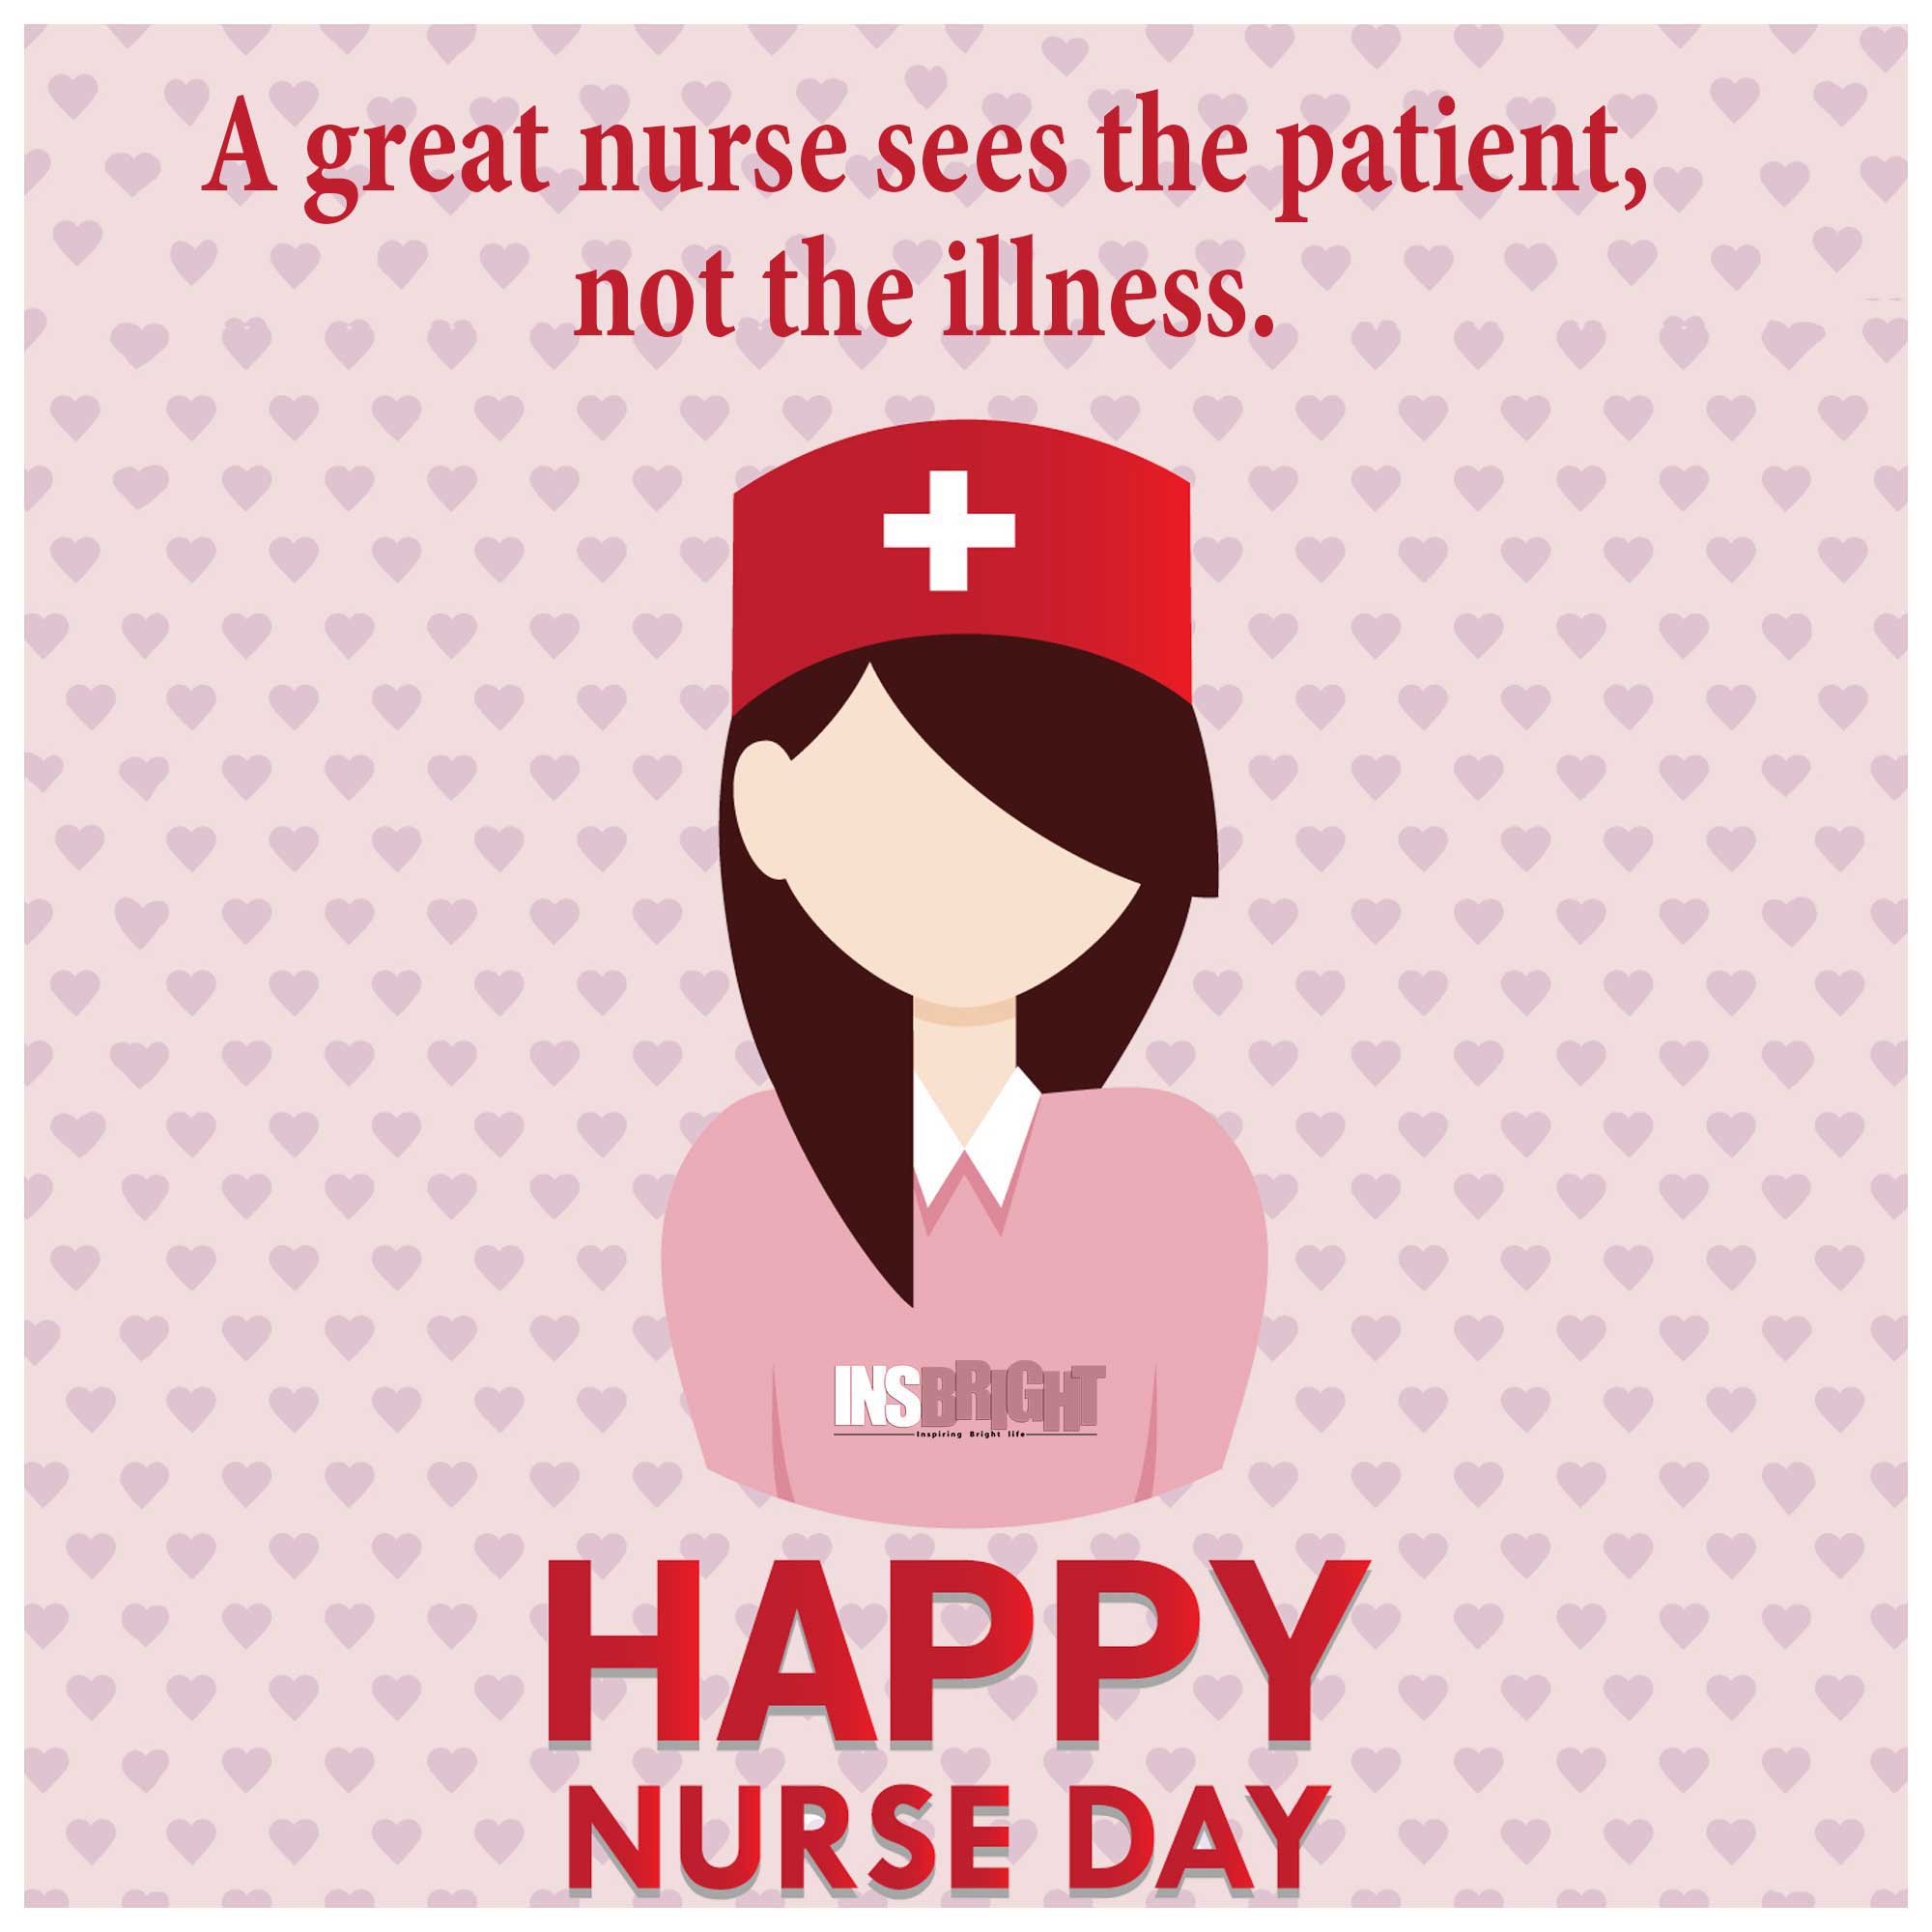 Inspirational Nursing Quotes With Image. Quotes For Nurses